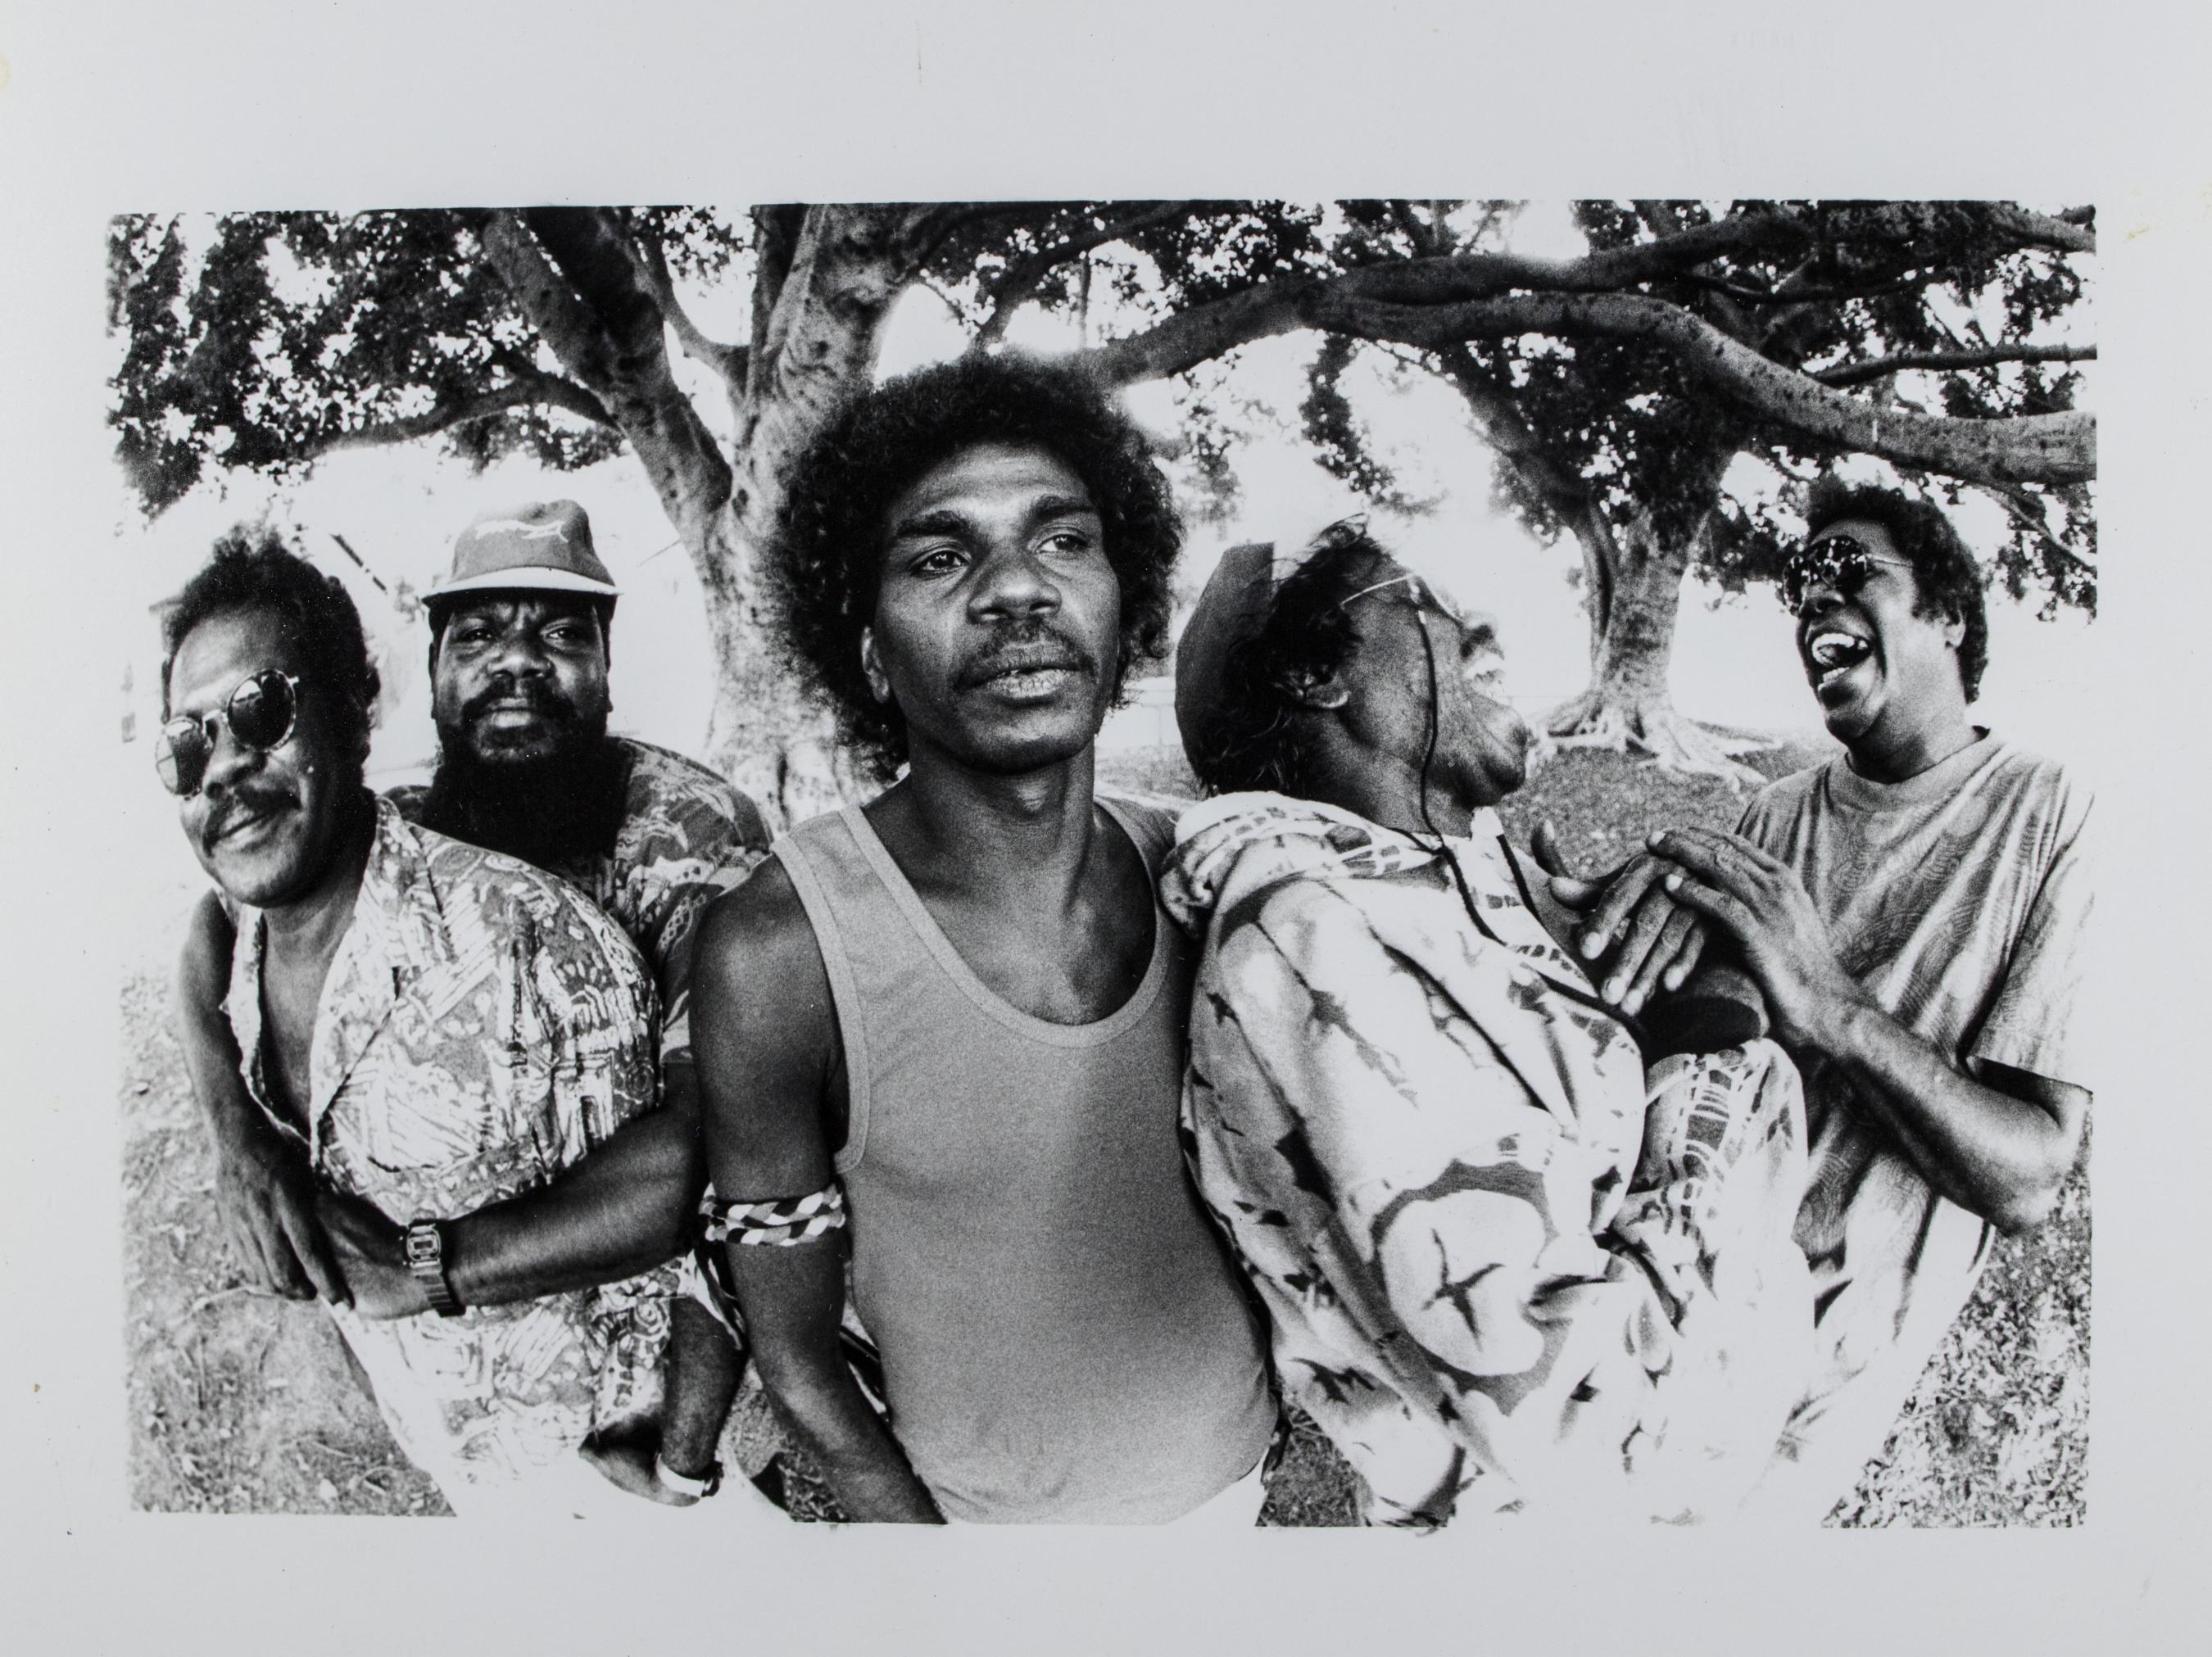 Black and white photograph of the Sunrize band. Five men posing for a photo - some laughing and some looking more serious